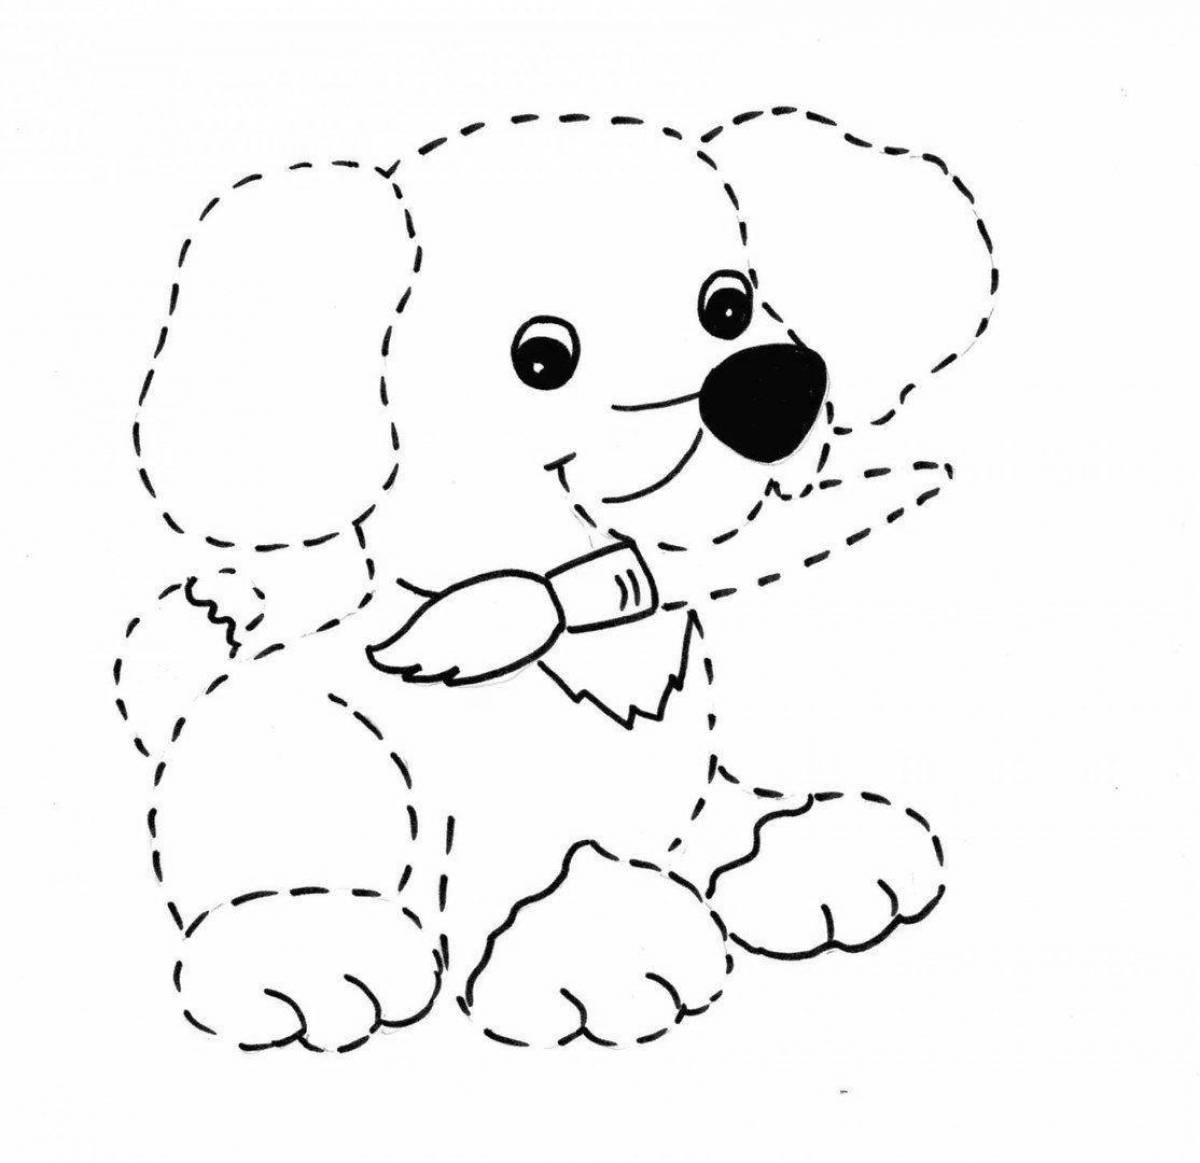 Fun dotted coloring for kids